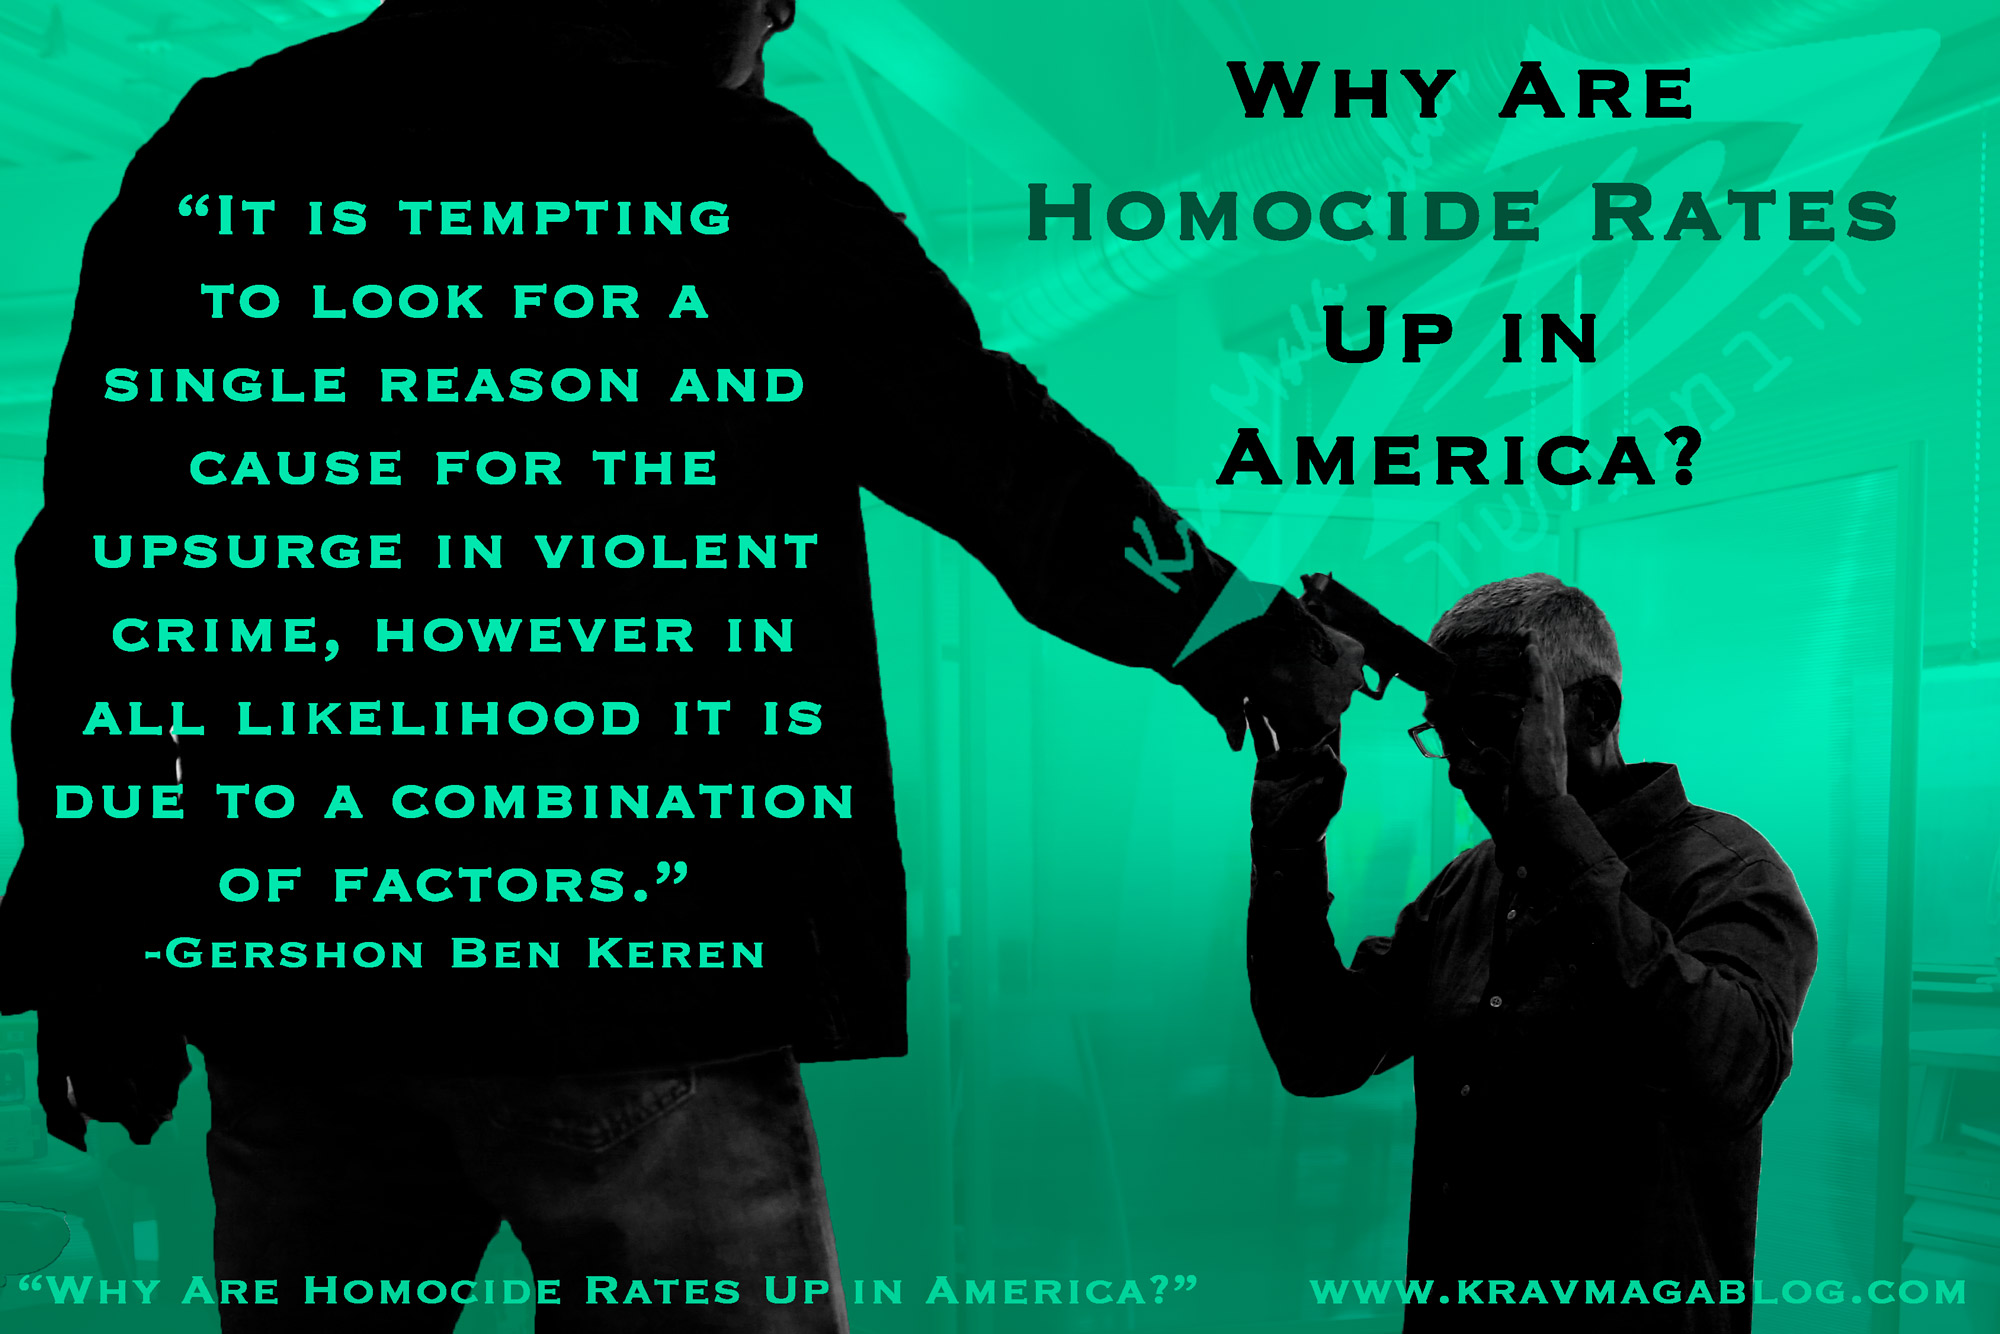 Why Are Homicide Rates Up In America?